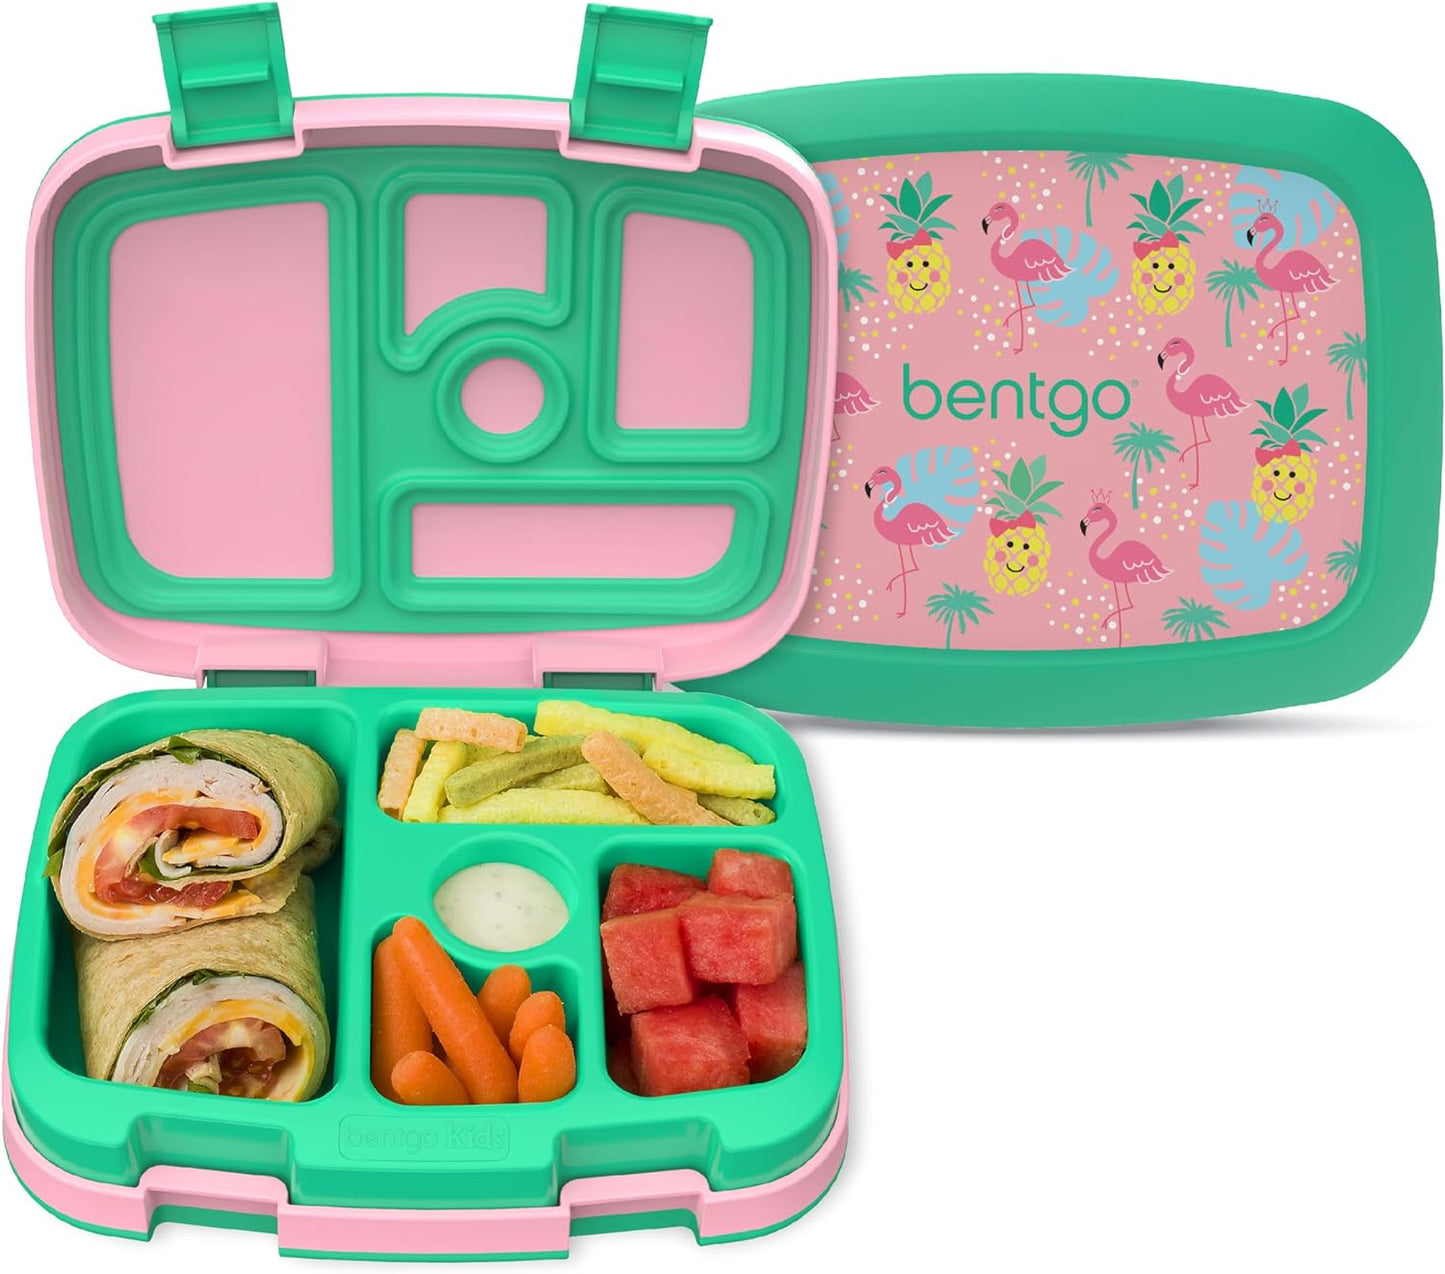 ® Kids Prints Leak-Proof, 5-Compartment Bento-Style Kids Lunch Box - Ideal Portion Sizes for Ages 3-7, Durable, Drop-Proof, Dishwasher Safe, & Made with Bpa-Free Materials (Dinosaur)